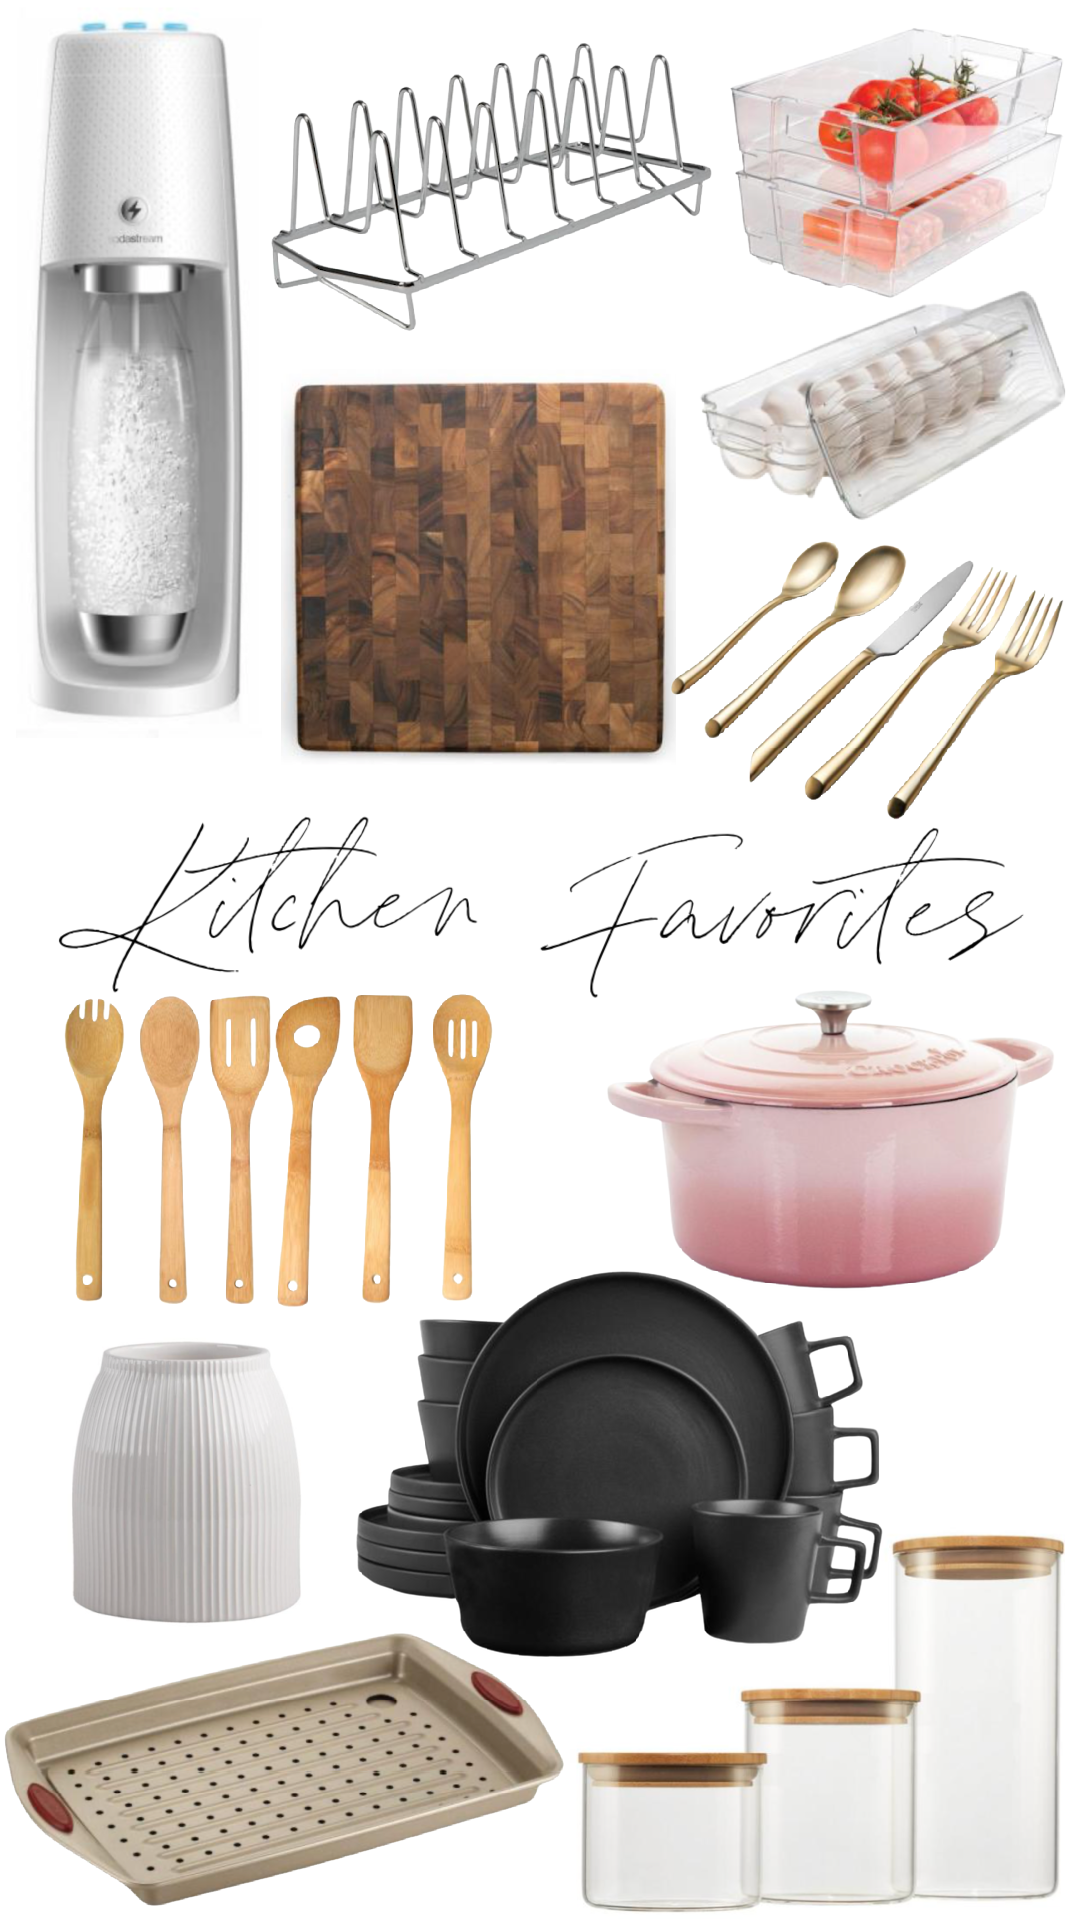 5 Kitchen Styling Tips & Kitchen Favorites - Nesting With Grace